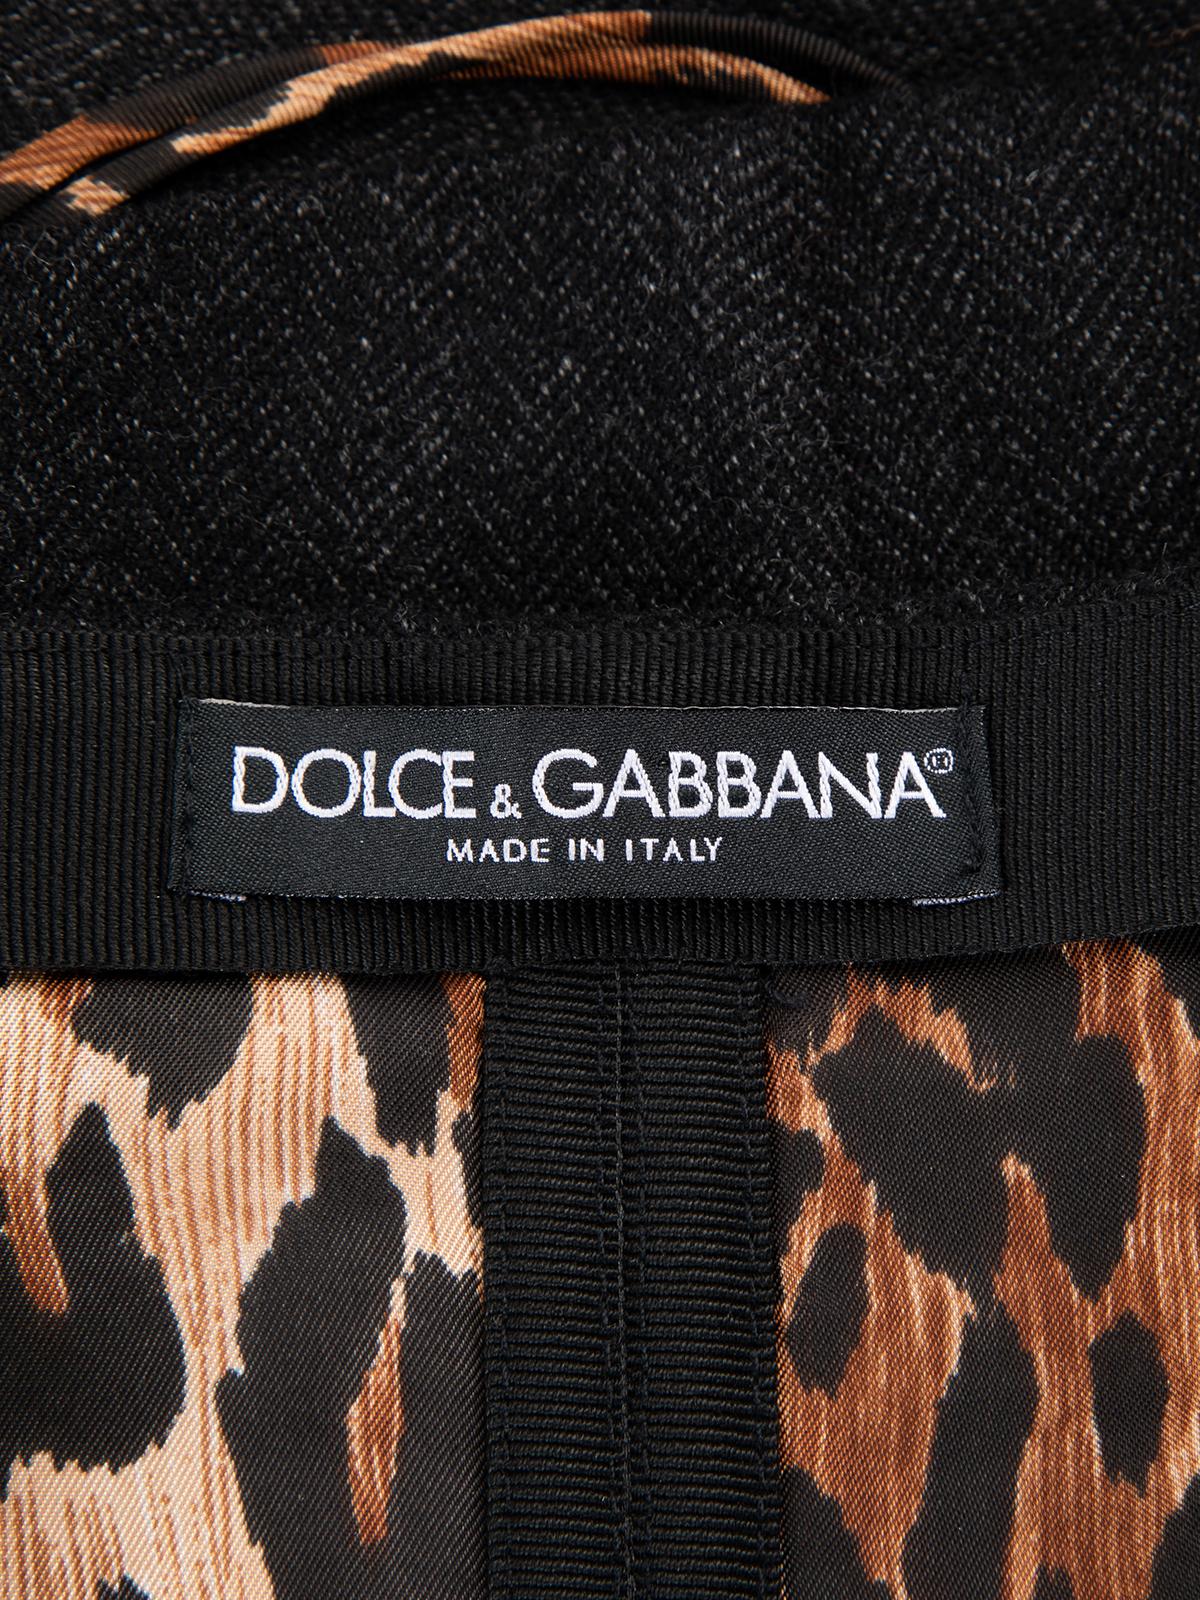 Pre-Loved Dolce & Gabbana Women's Wool Trousers and Corset Top Set 3